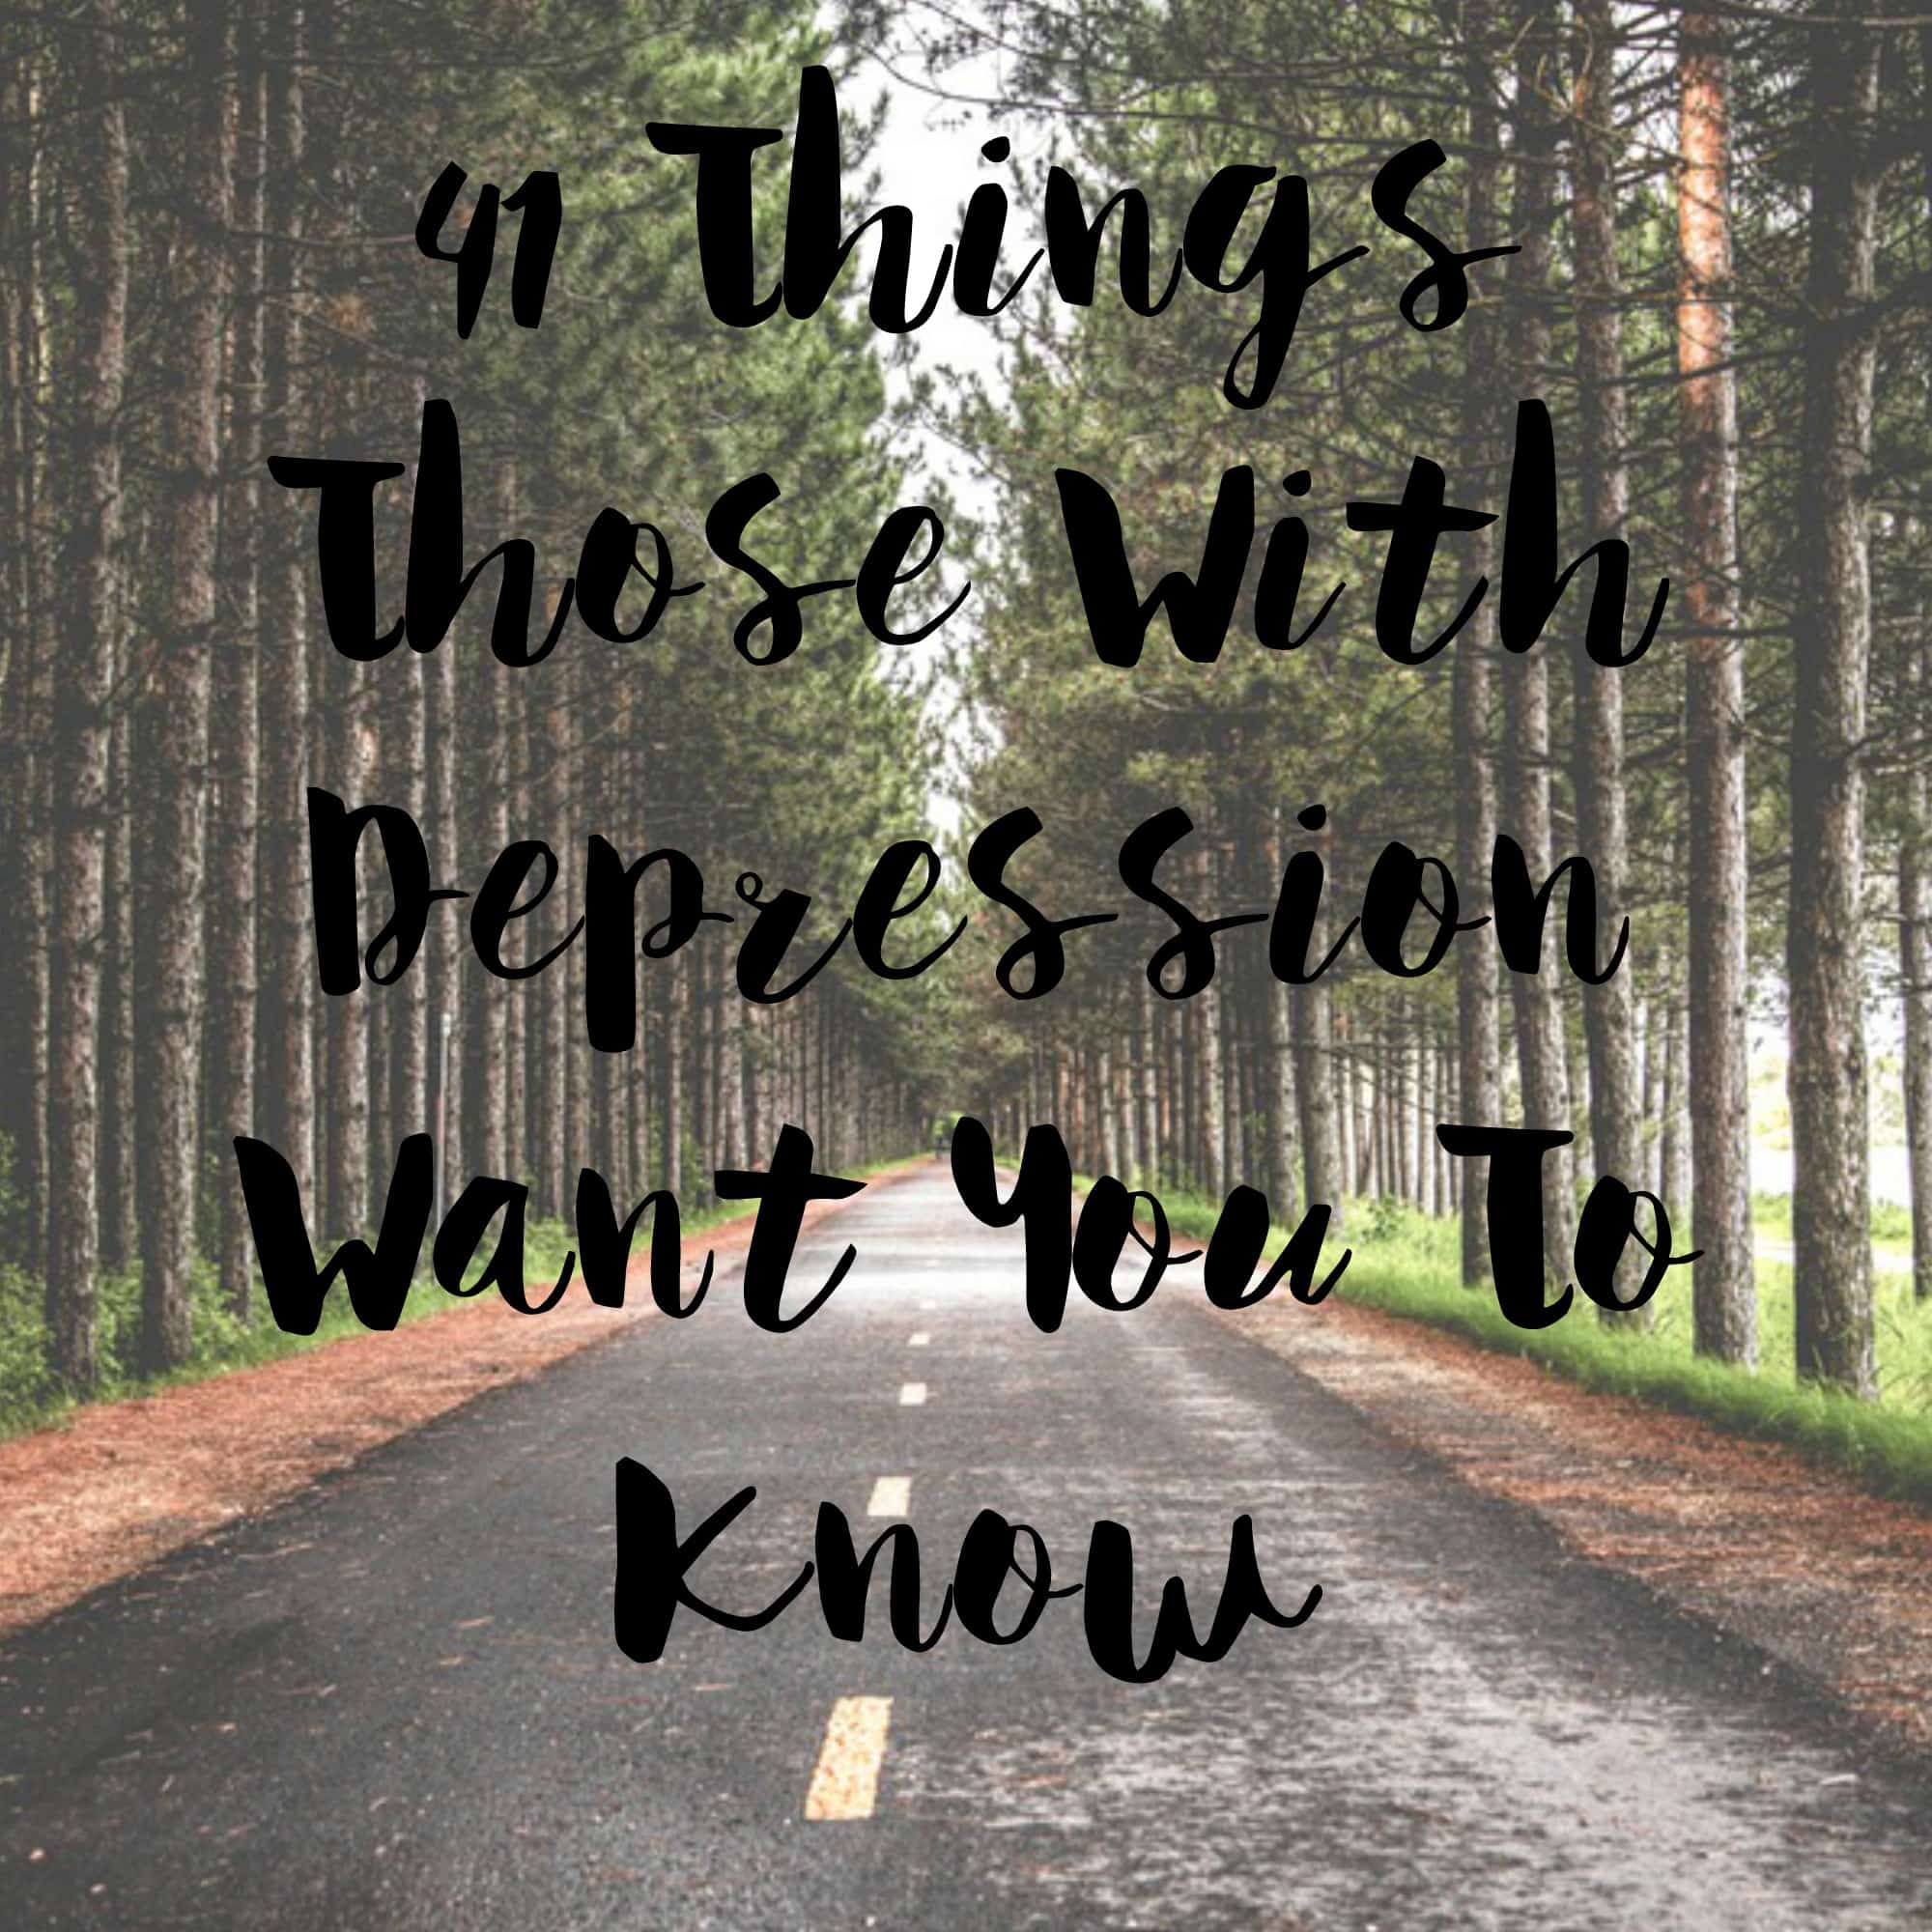 41 Things Those With Depression Want You to Know